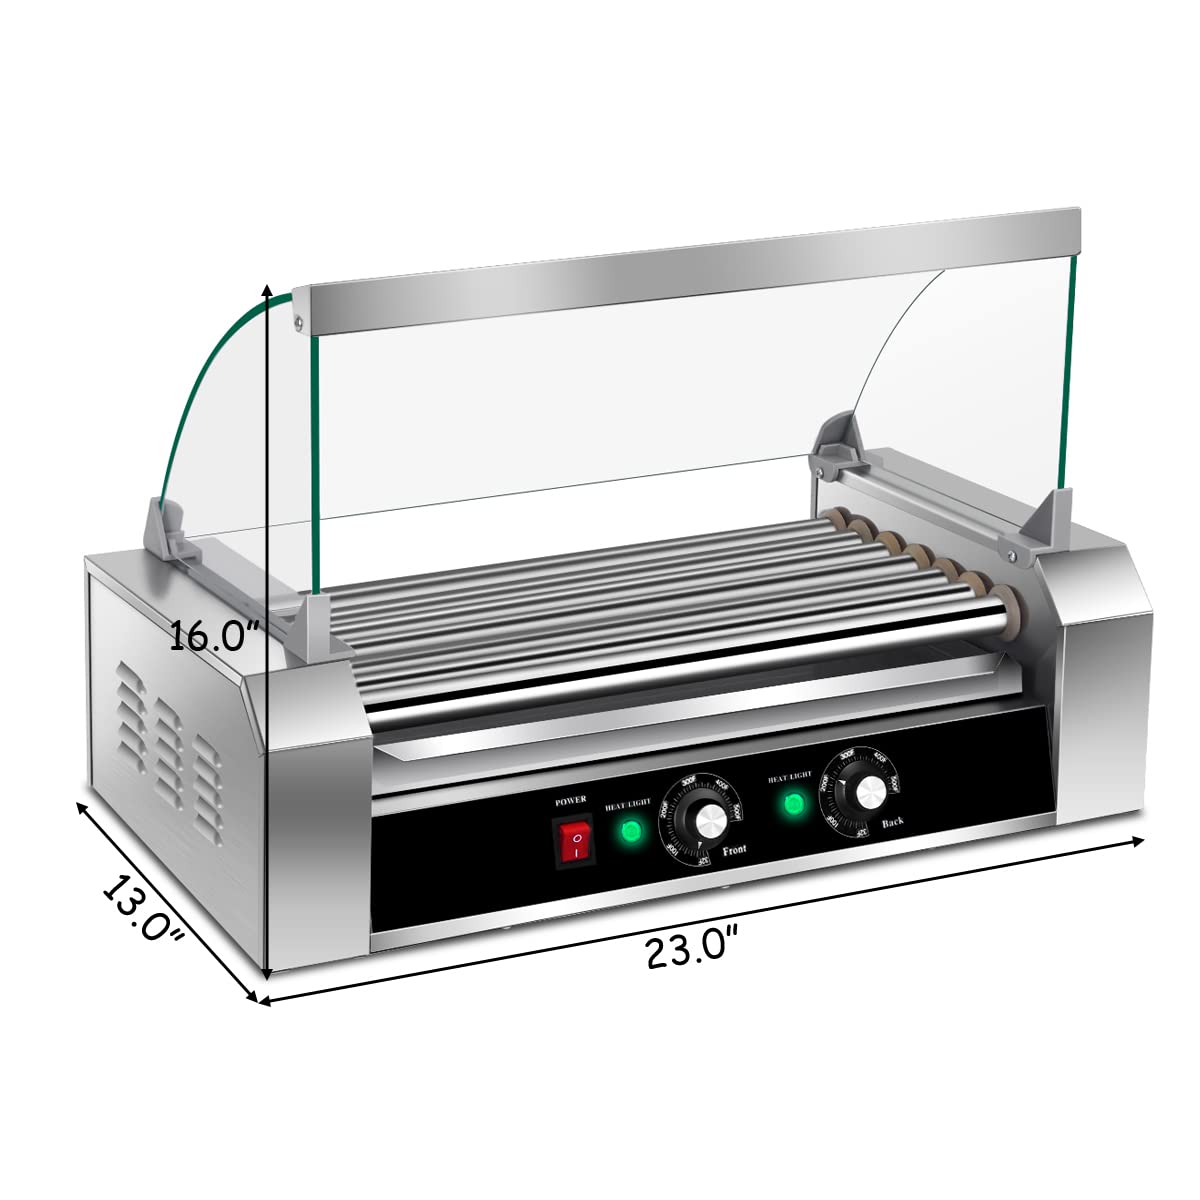 Giantex 7 Non-Stick Rollers 18 Hot Dog Sausage Grill Cooker Machine with Removable Stainless Steel Drip Tray and Glass Hood Cover